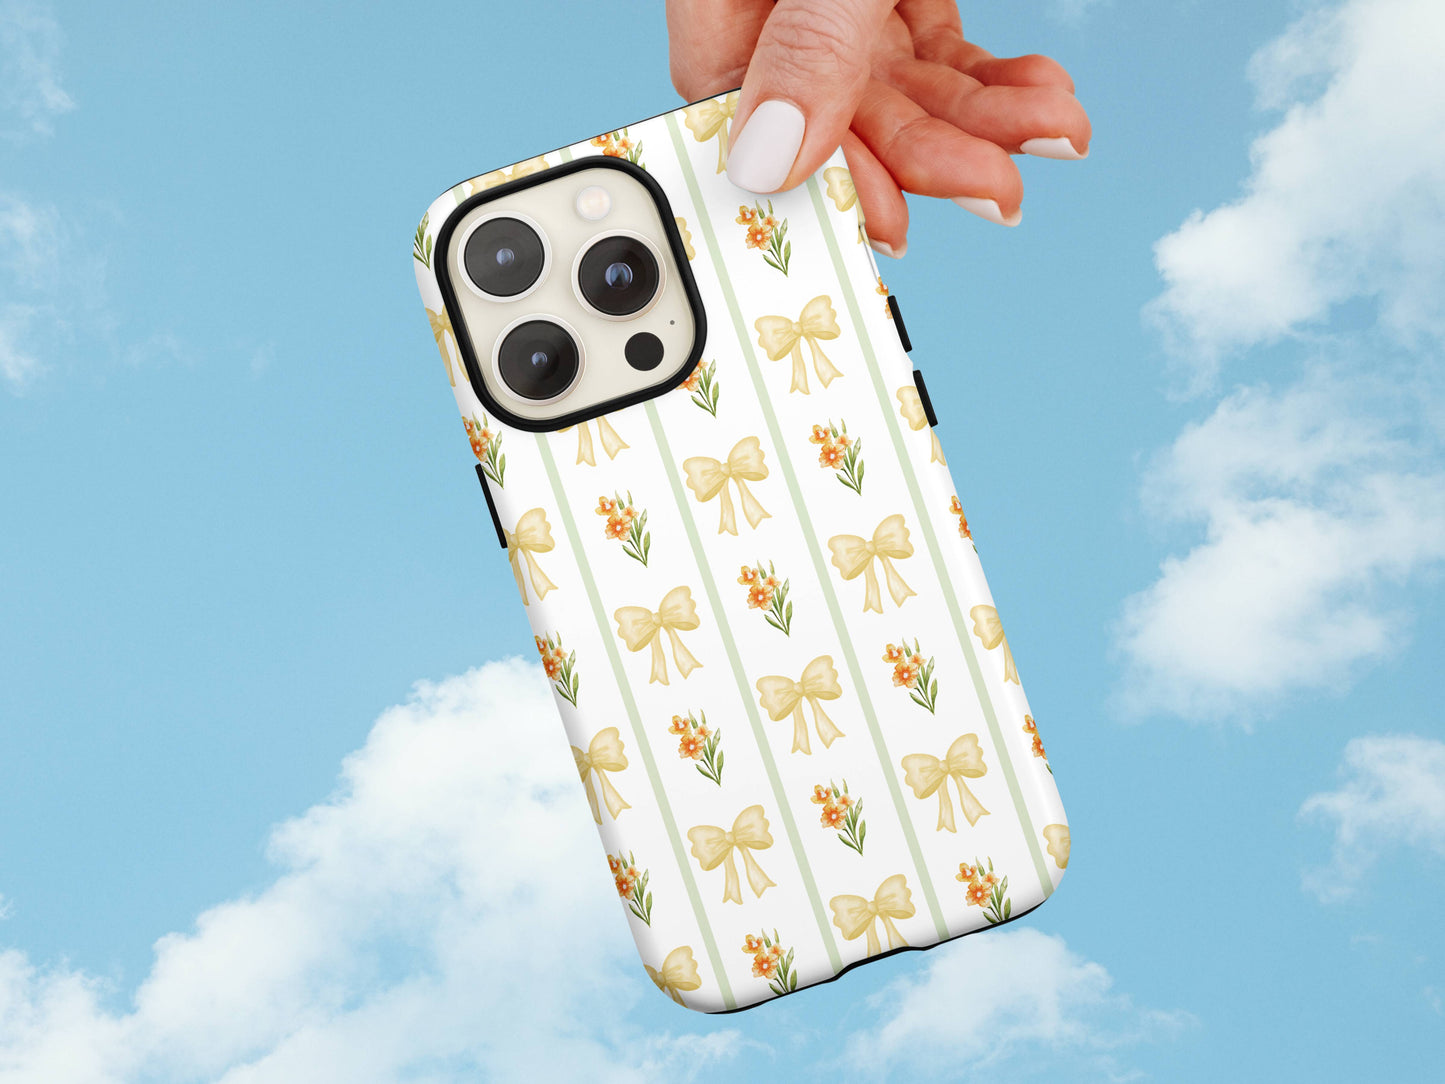 Yellow Bows iPhone Case